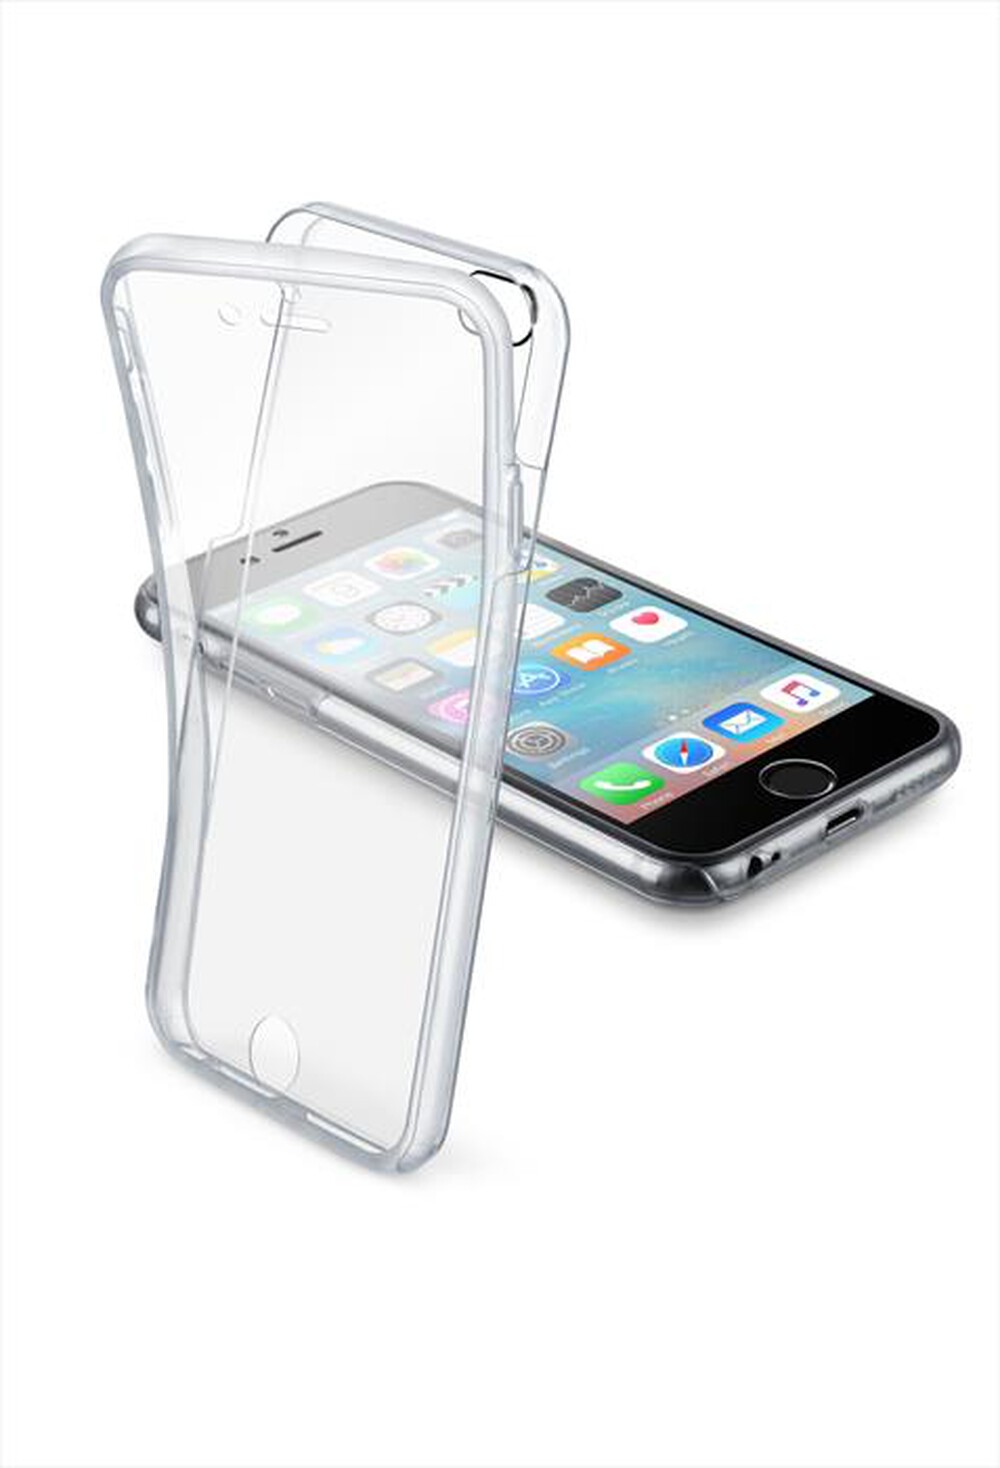 "CELLULARLINE - CLEARTOUCHIPH647T Back cover Clear Touch iPhone 6-Trasparente"